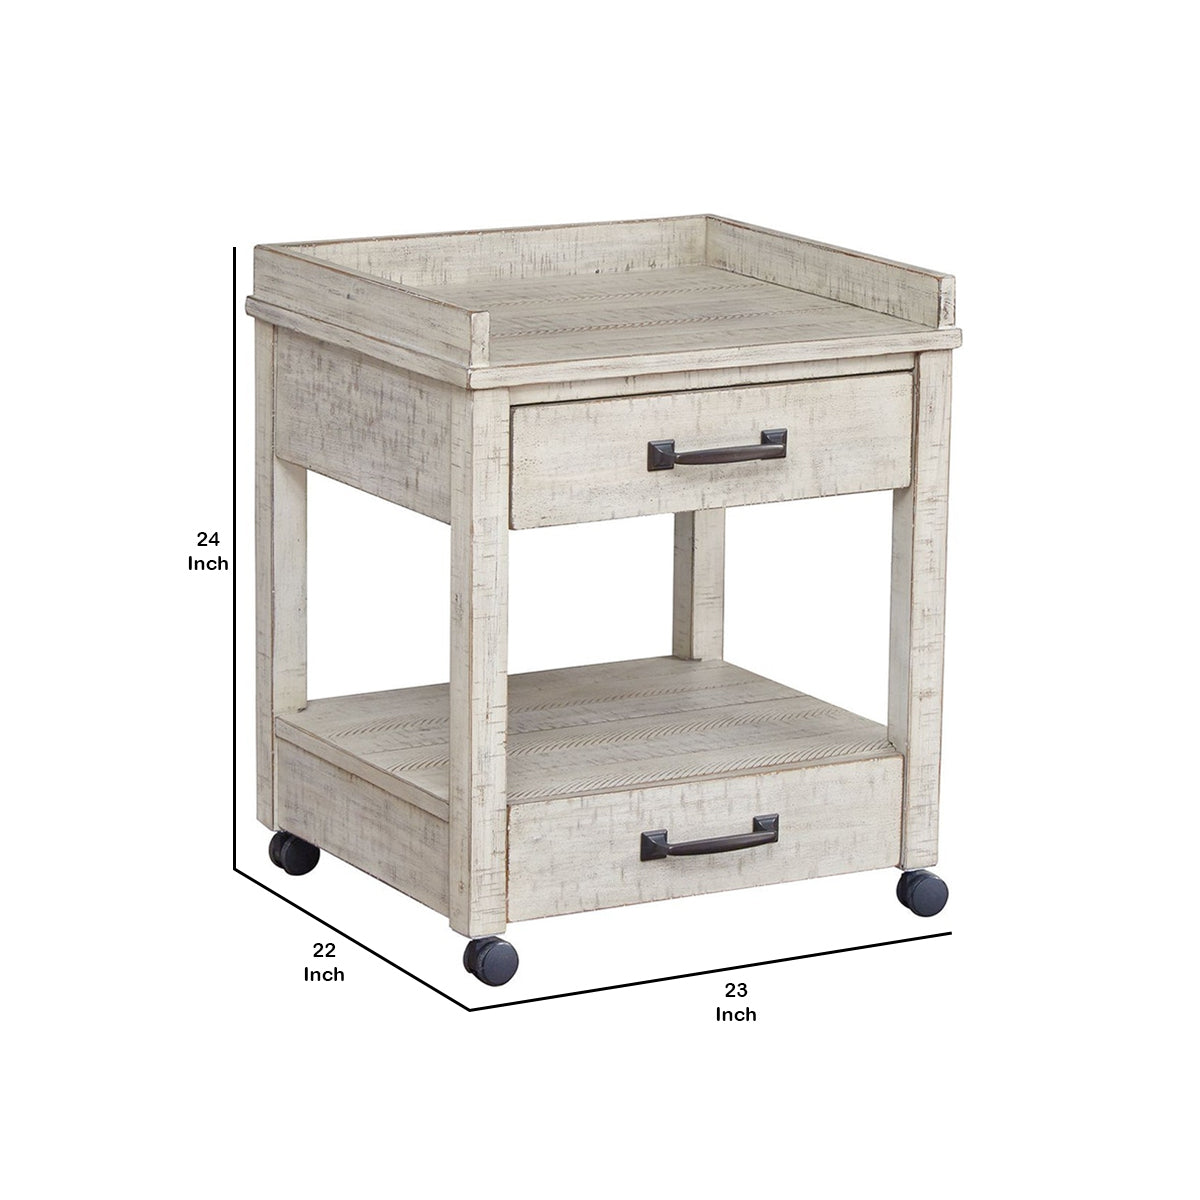 Wooden Printer Stand with 2 Drawers and Open Bottom Shelf in Distressed White - BM209263